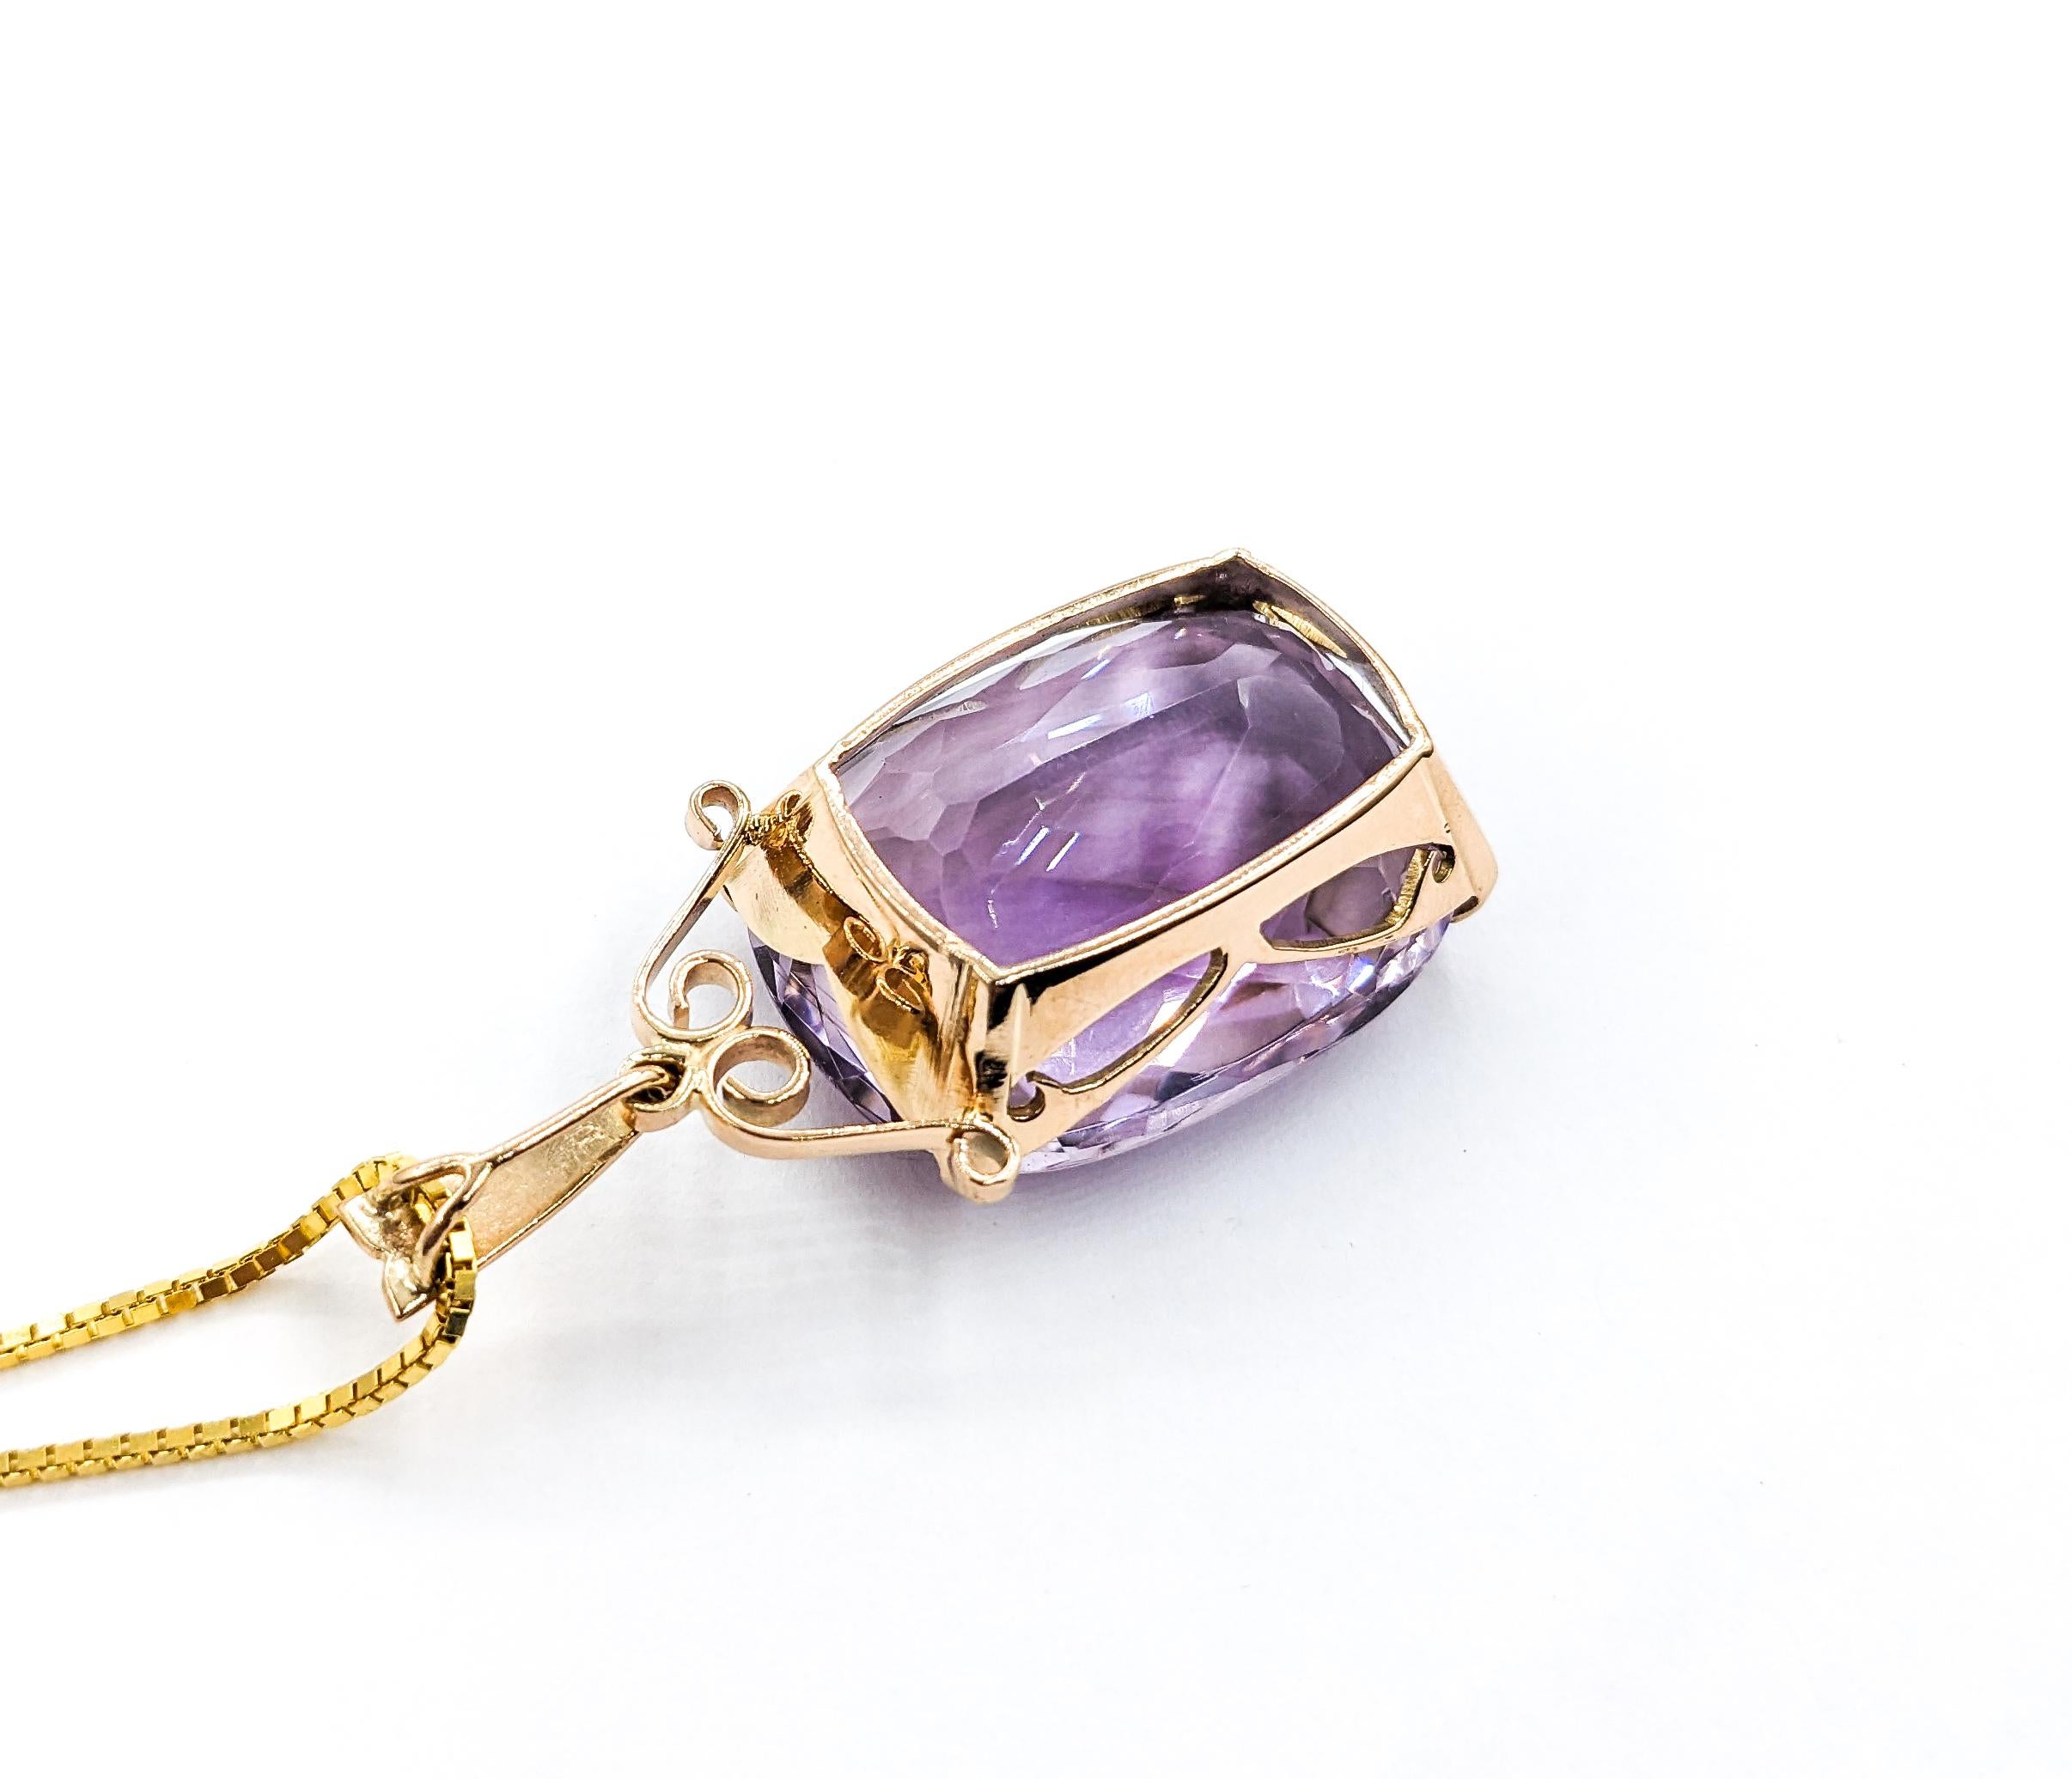 46ct Amethyst Pendant With Chain In Yellow Gold In Excellent Condition For Sale In Bloomington, MN